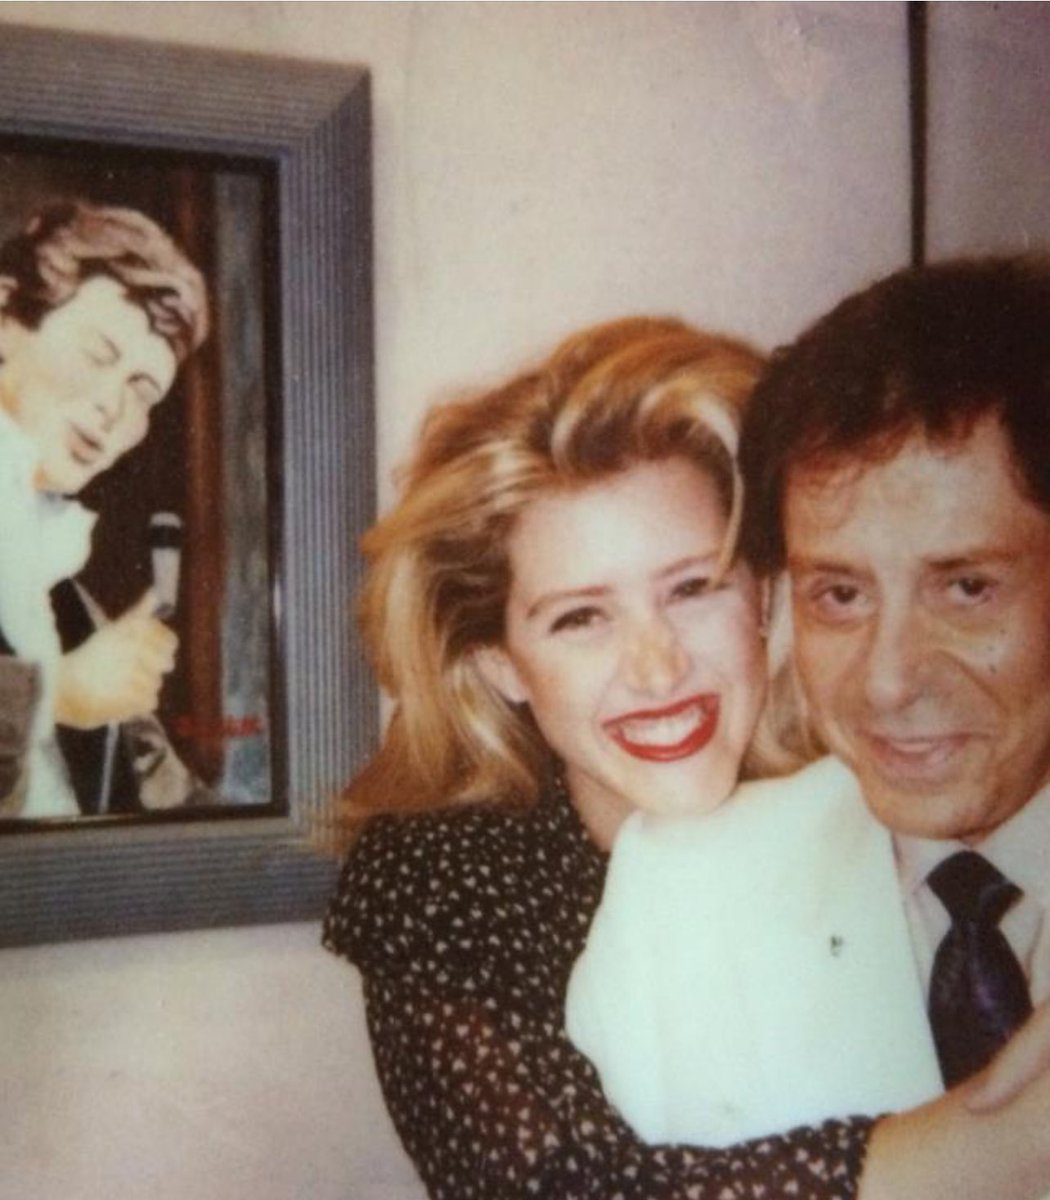 Look at this!!! #ohmypapa #eddiefisher and baby me in front of a portrait painted by #tonybennett …happy memory♥️